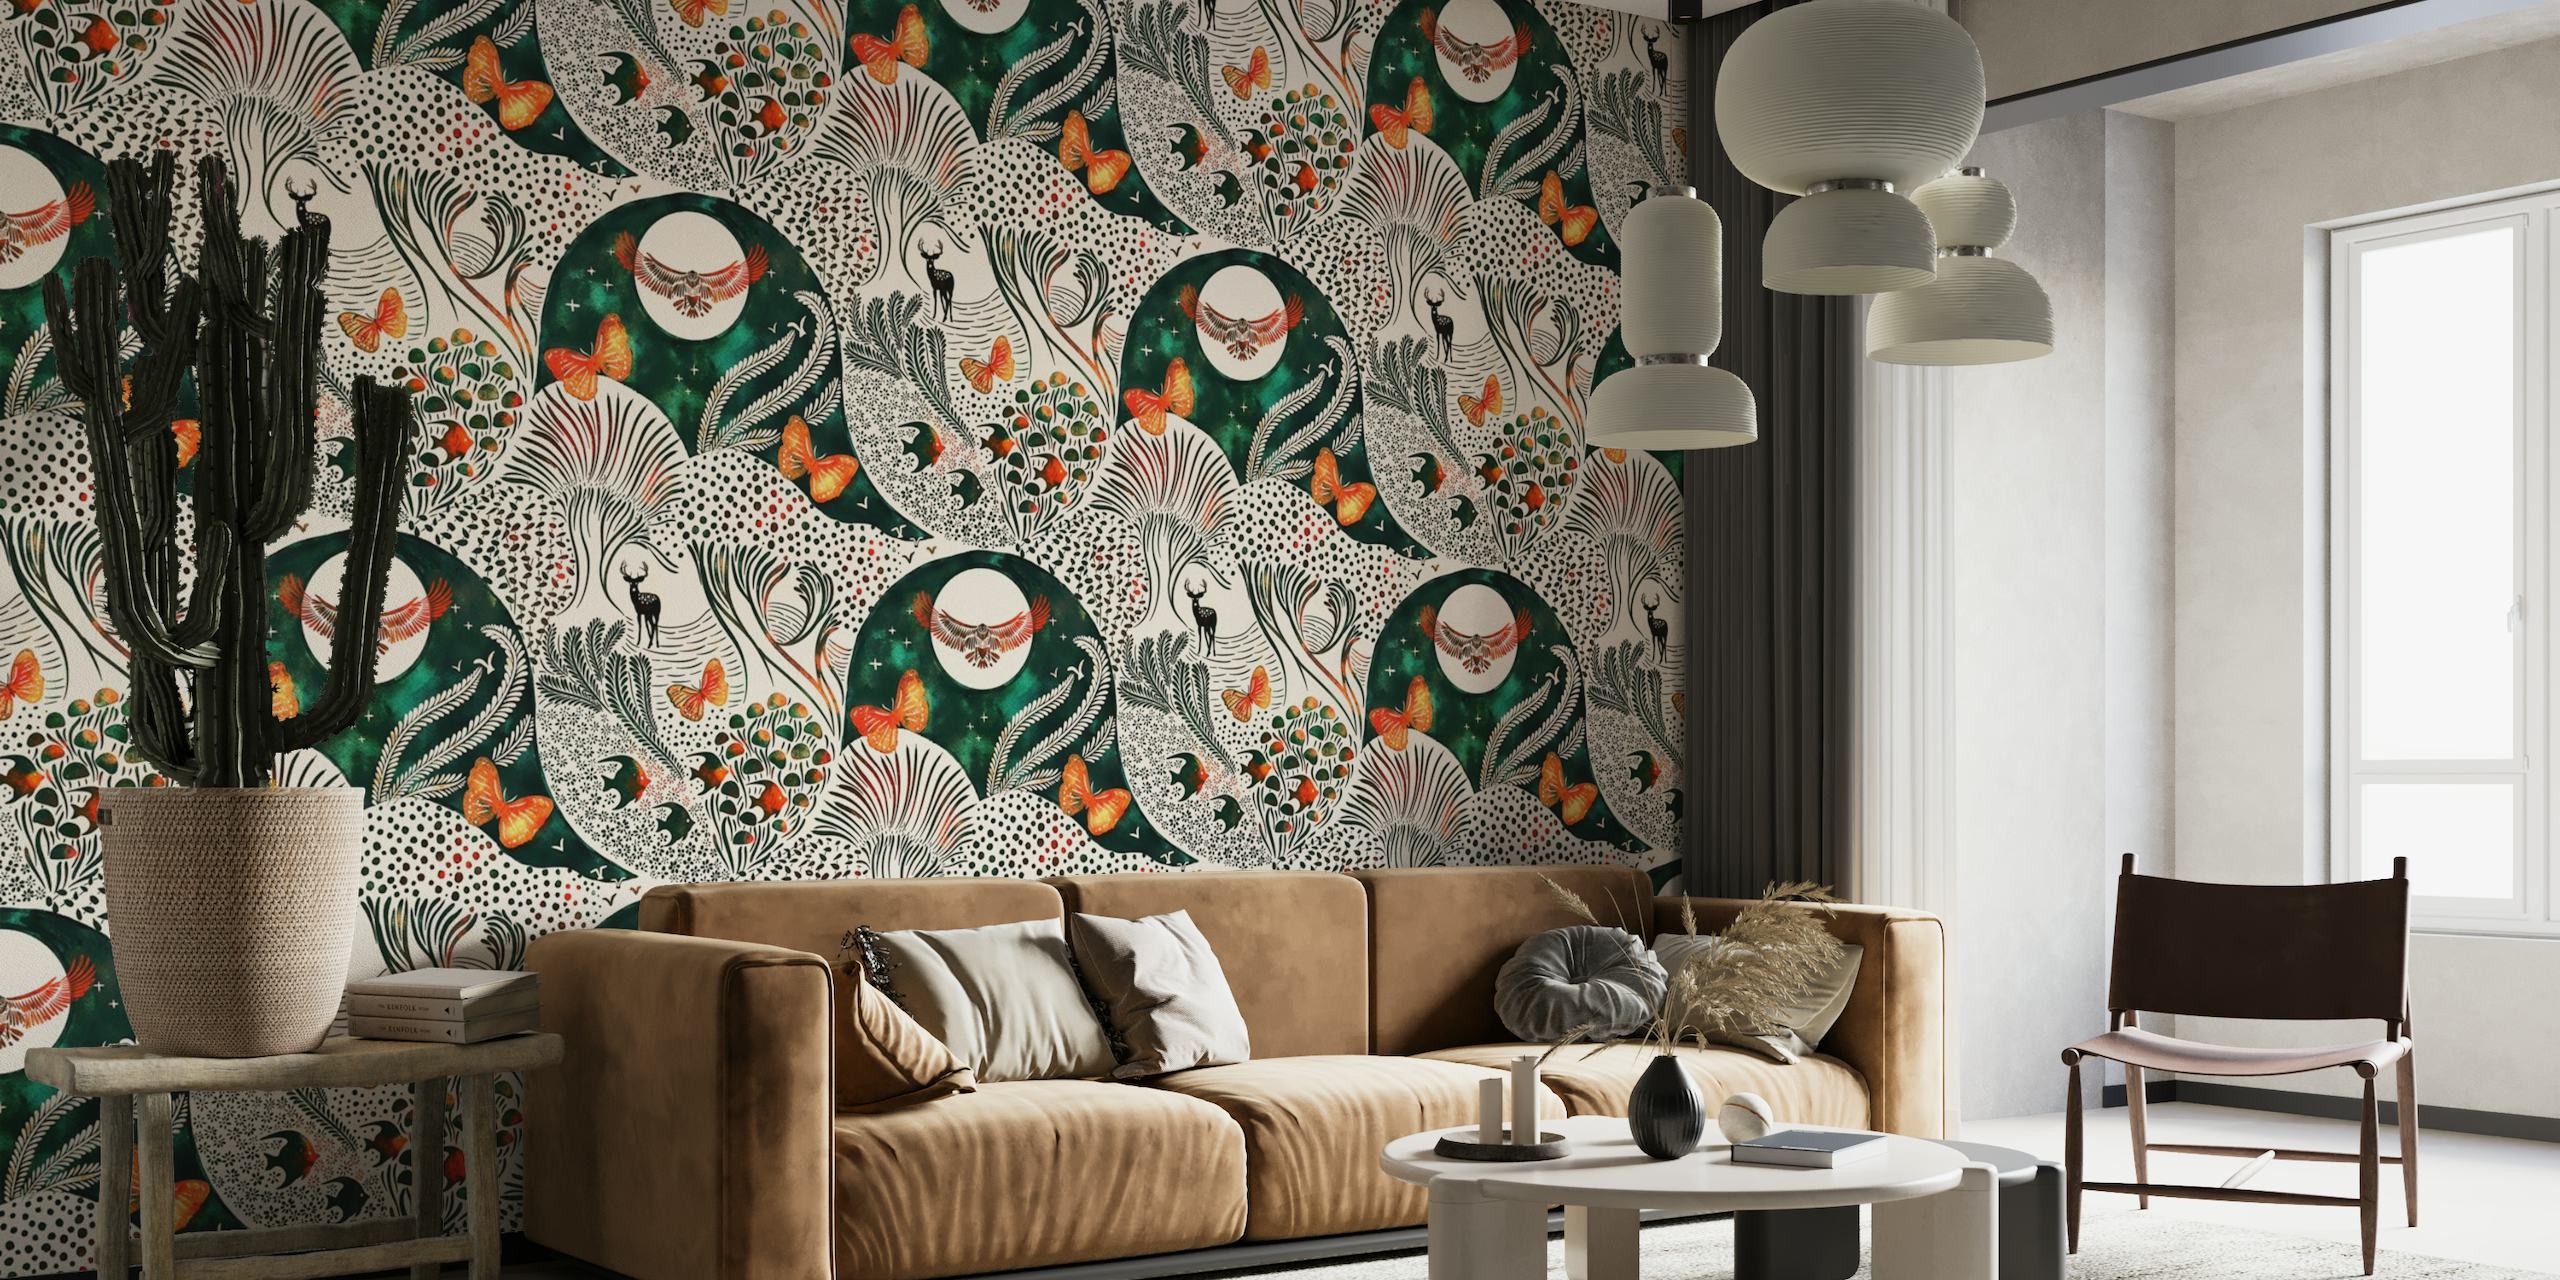 Fantasy-inspired wall mural with stylized trees and animals in a mesmerizing pattern